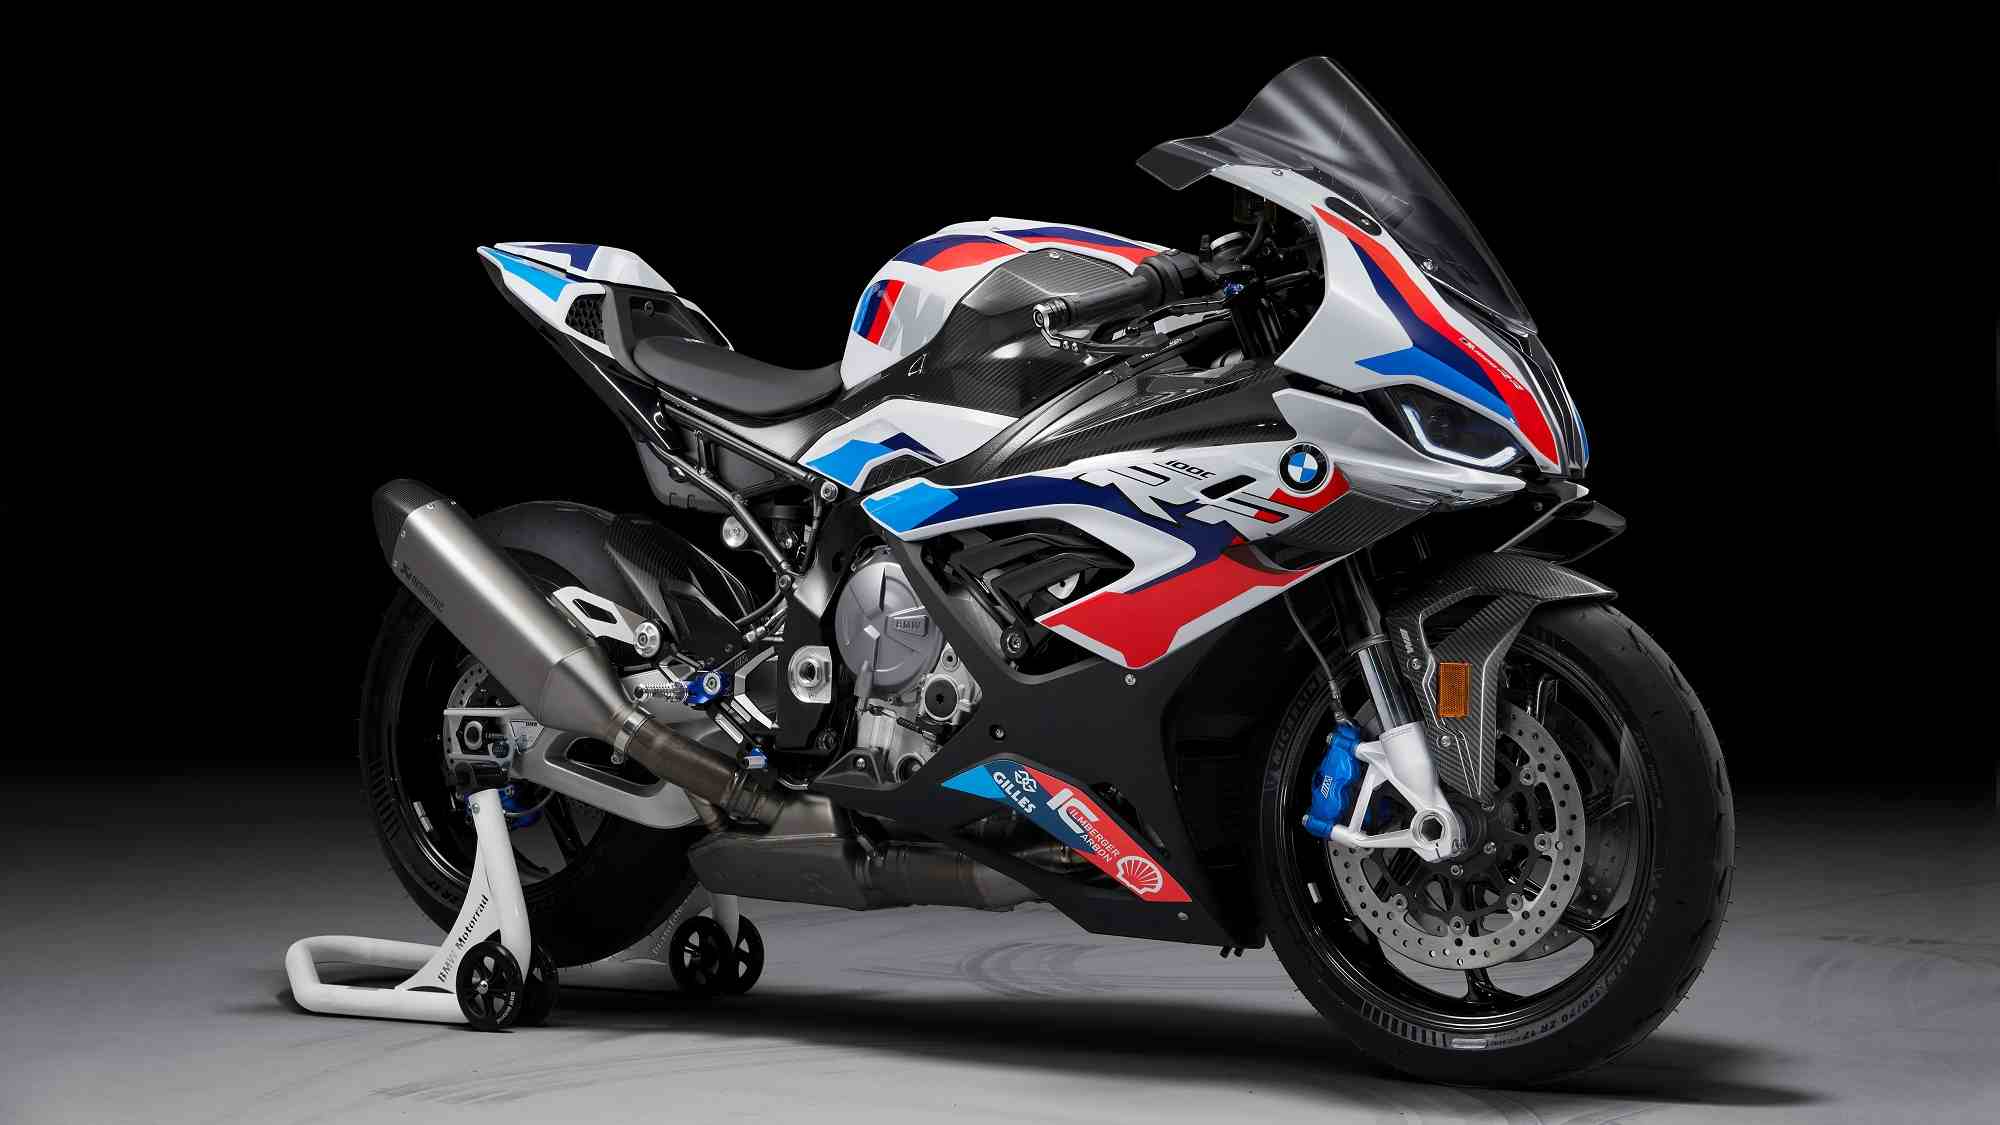 At Rs 42 lakh, the BMW M1000RR costs more than twice as much as the base S1000RR. Image: BMW Motorrad